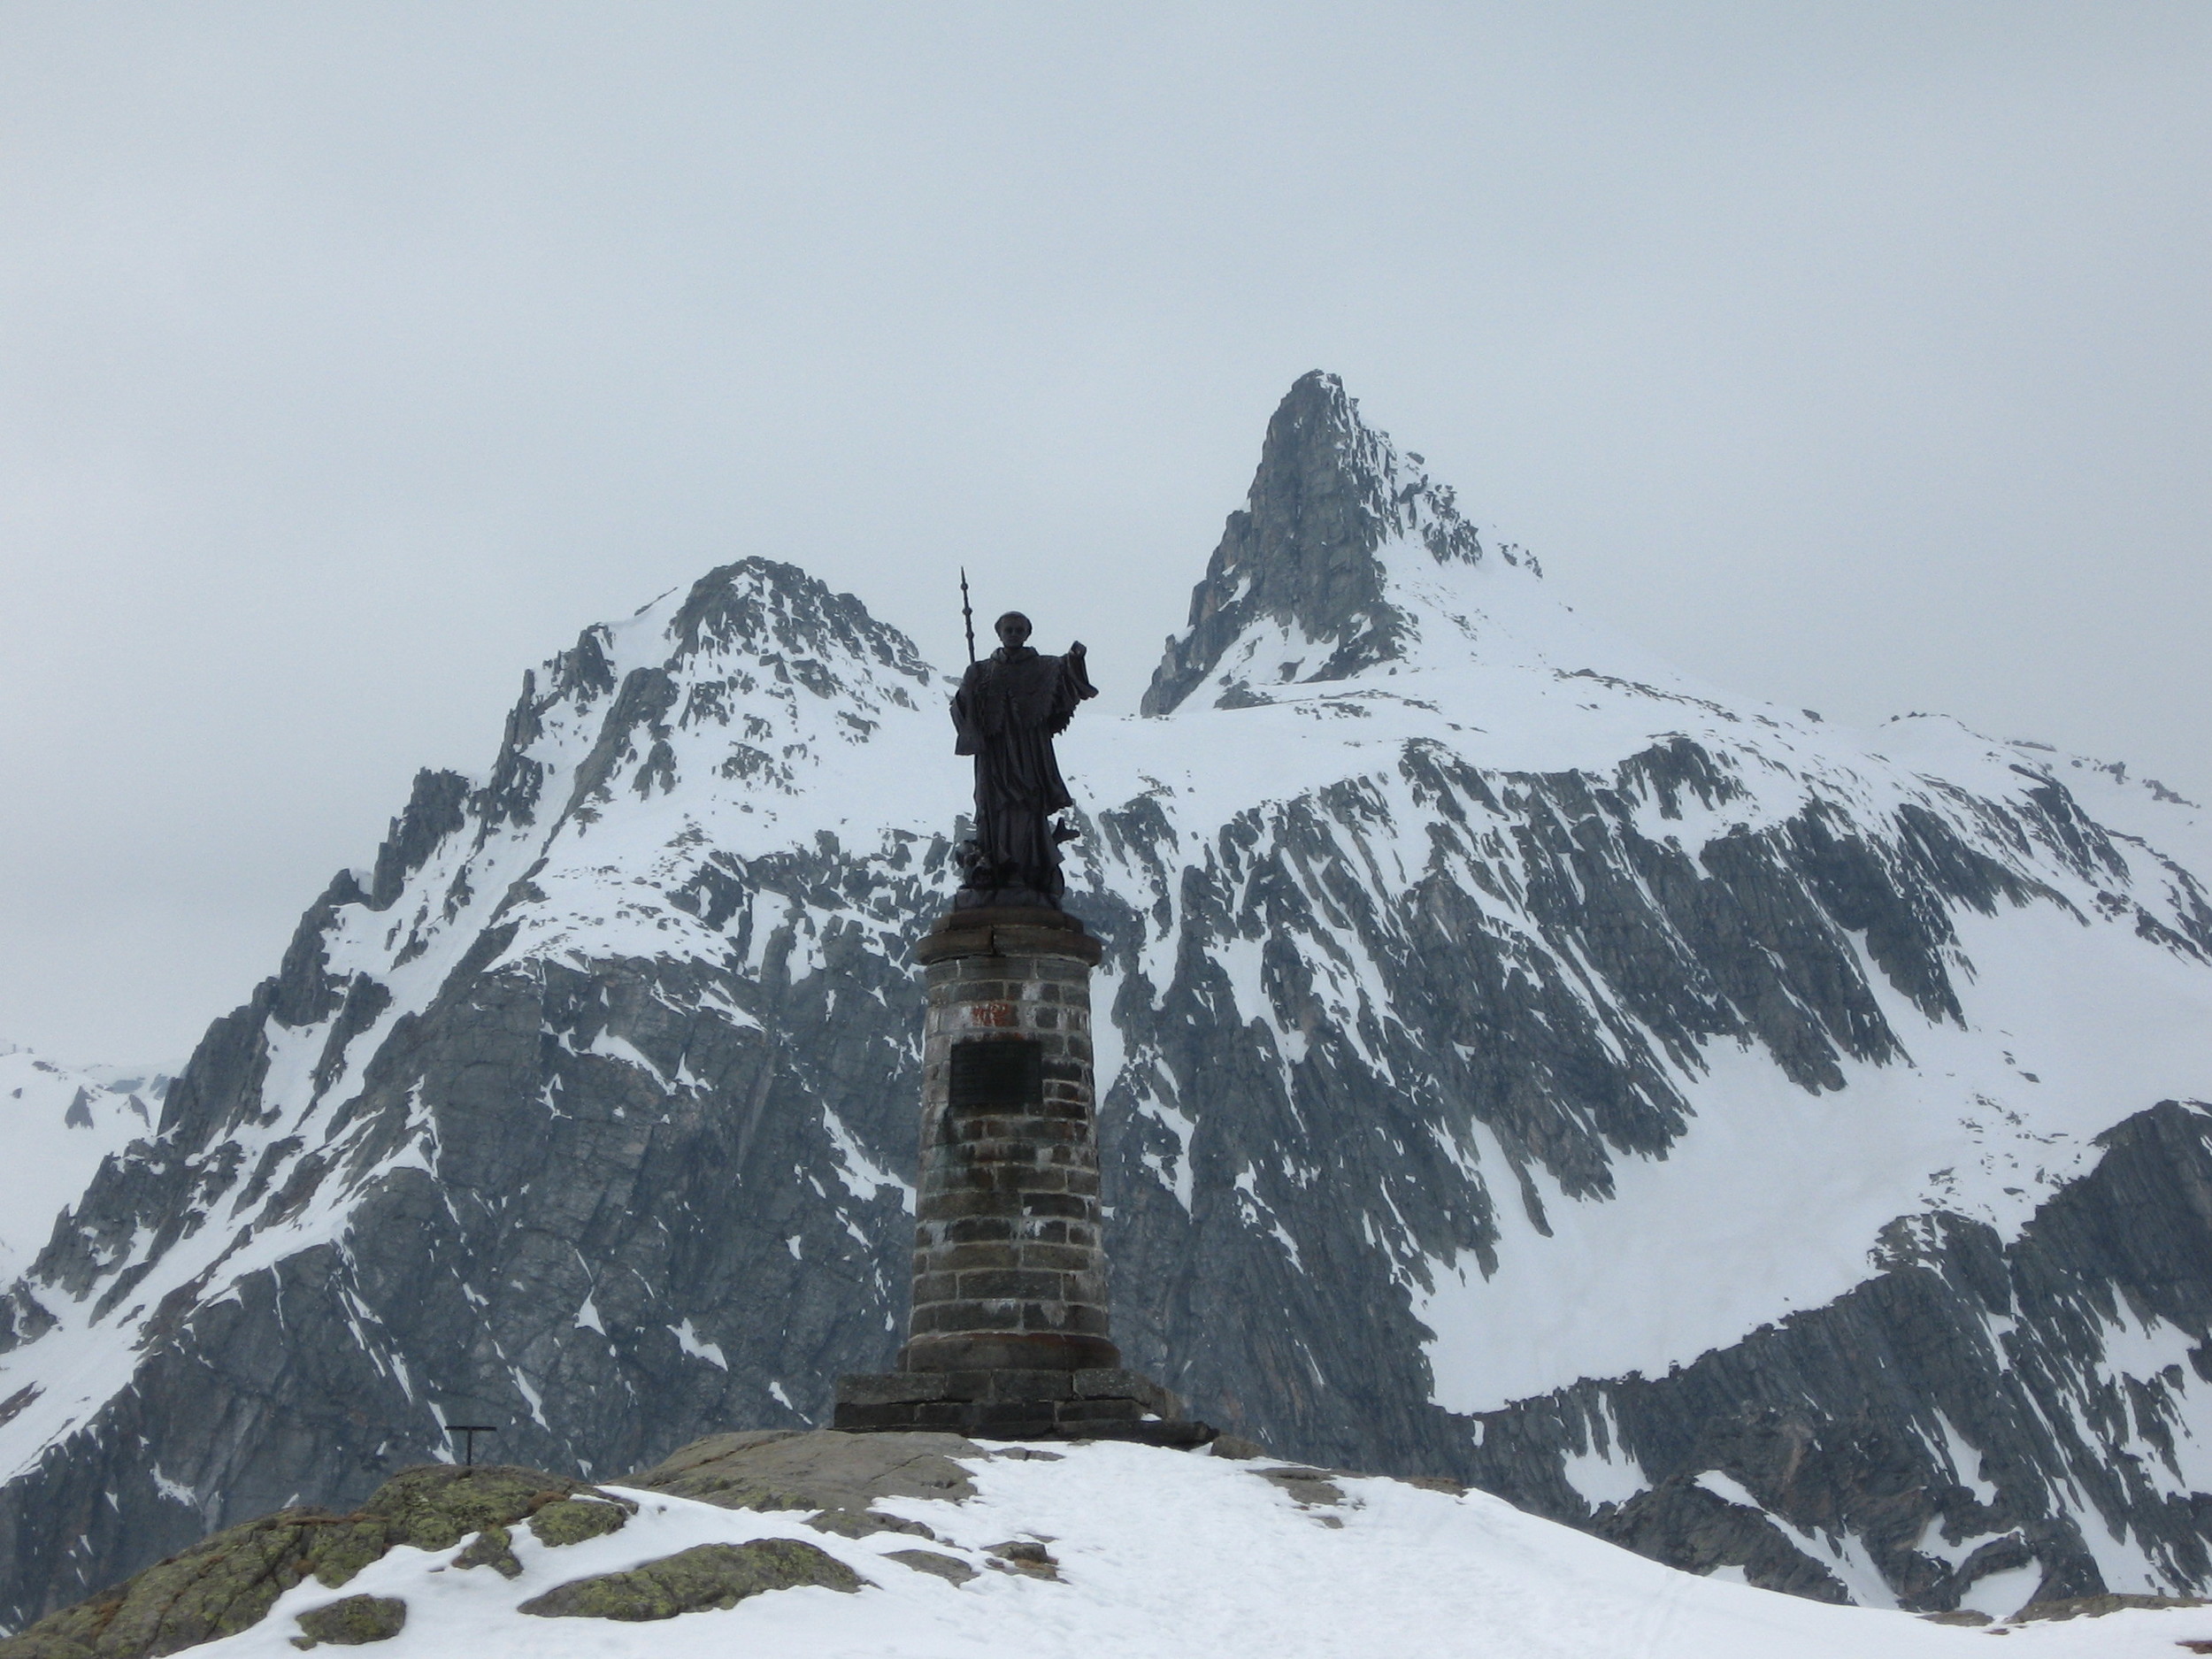 Day 2: St. Bernard welcomes us to his pass